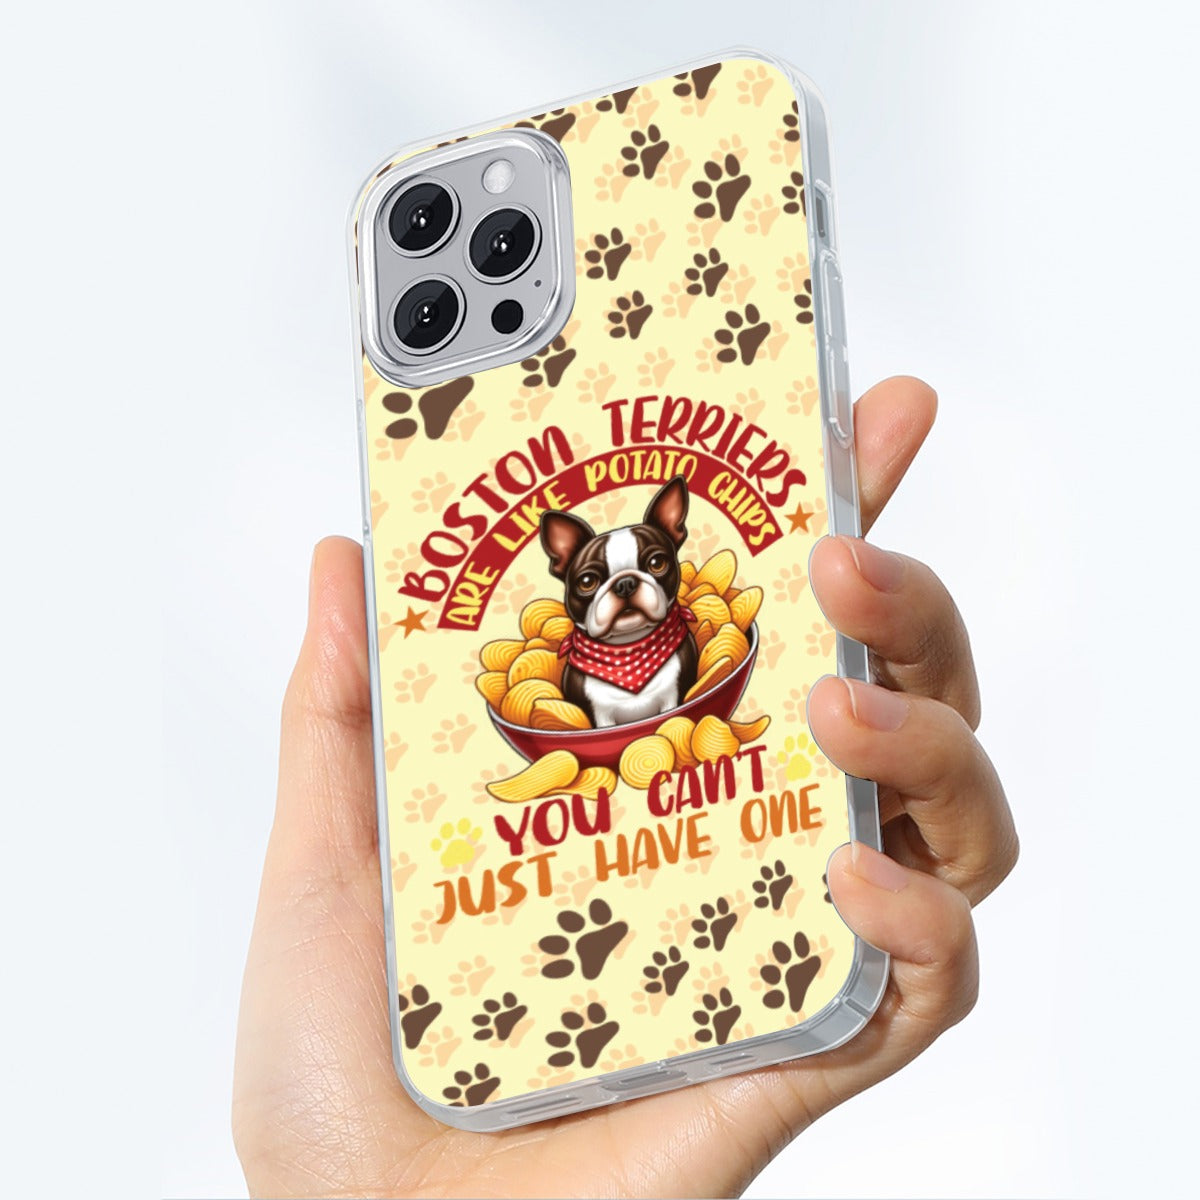 Lily - iPhone case for Boston Terrier lovers